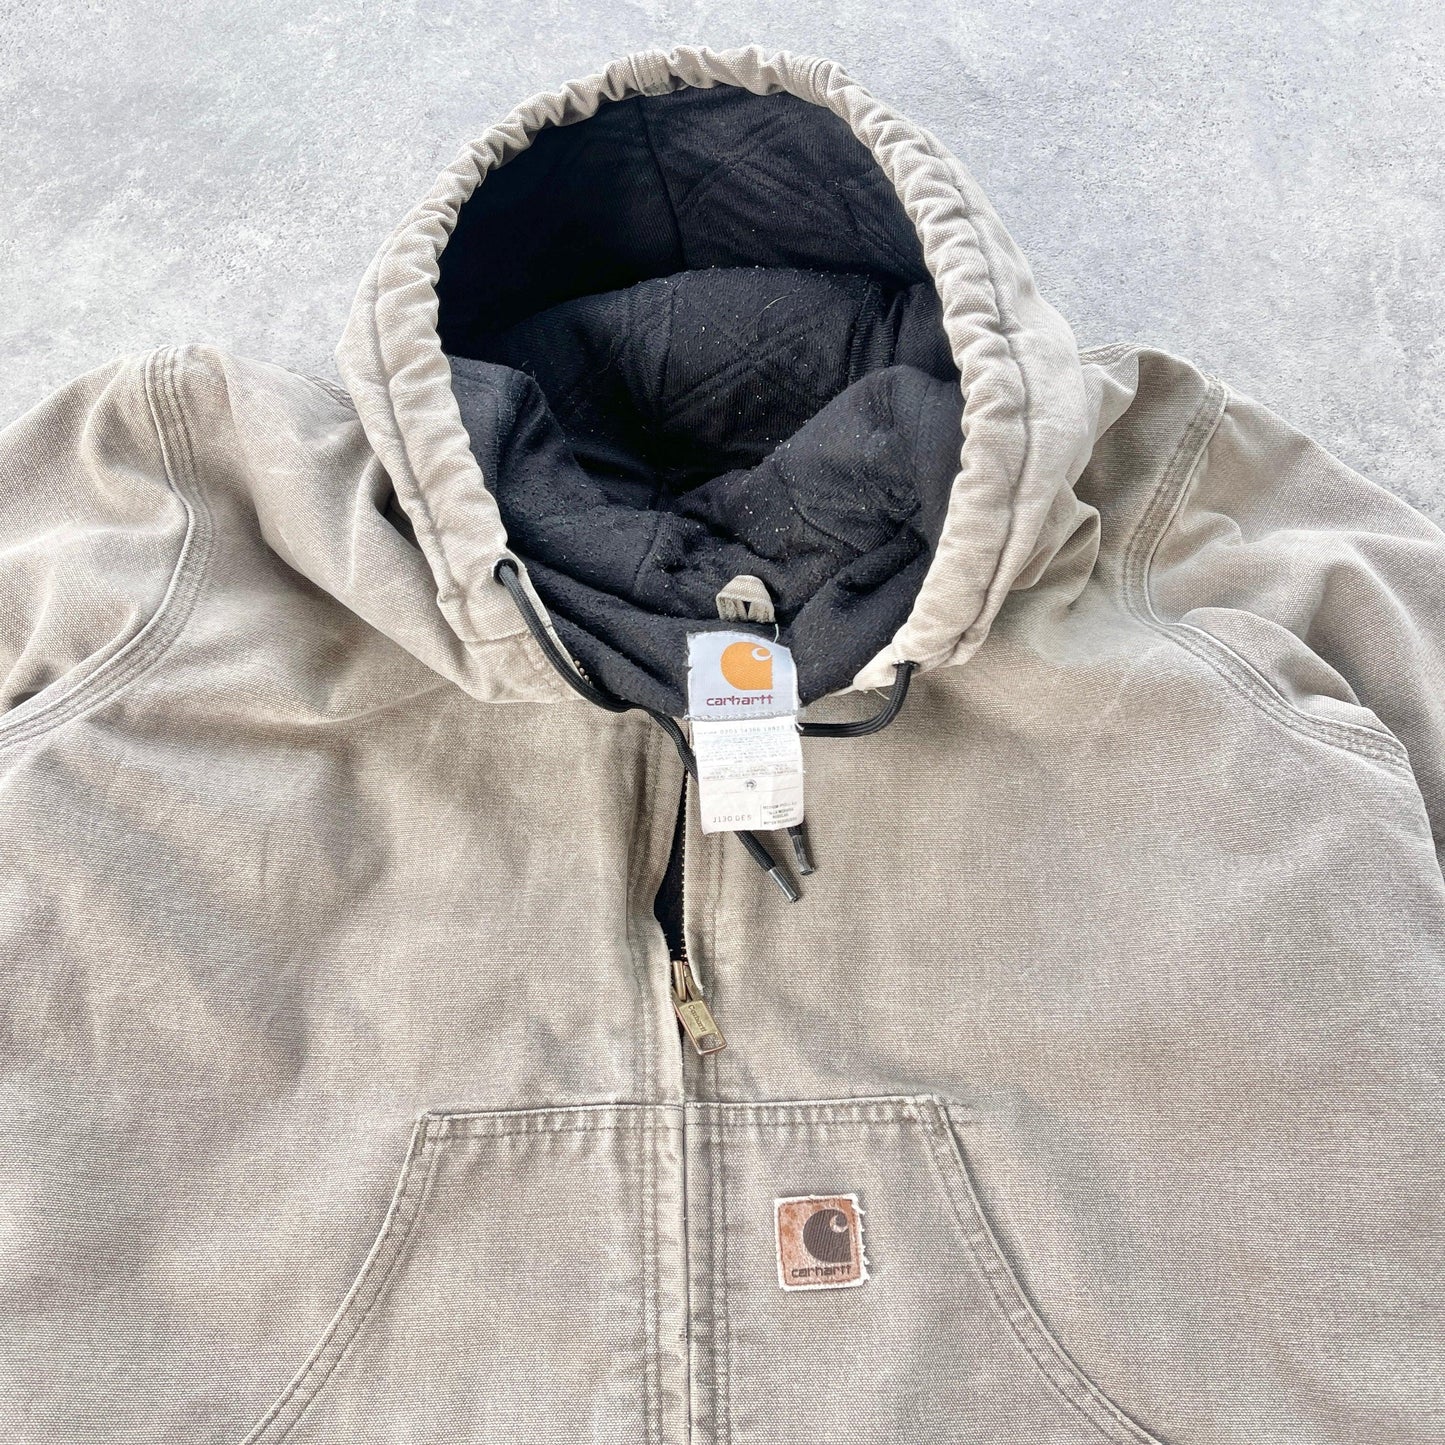 Carhartt 2003 heavyweight hooded Active jacket (M) - Known Source